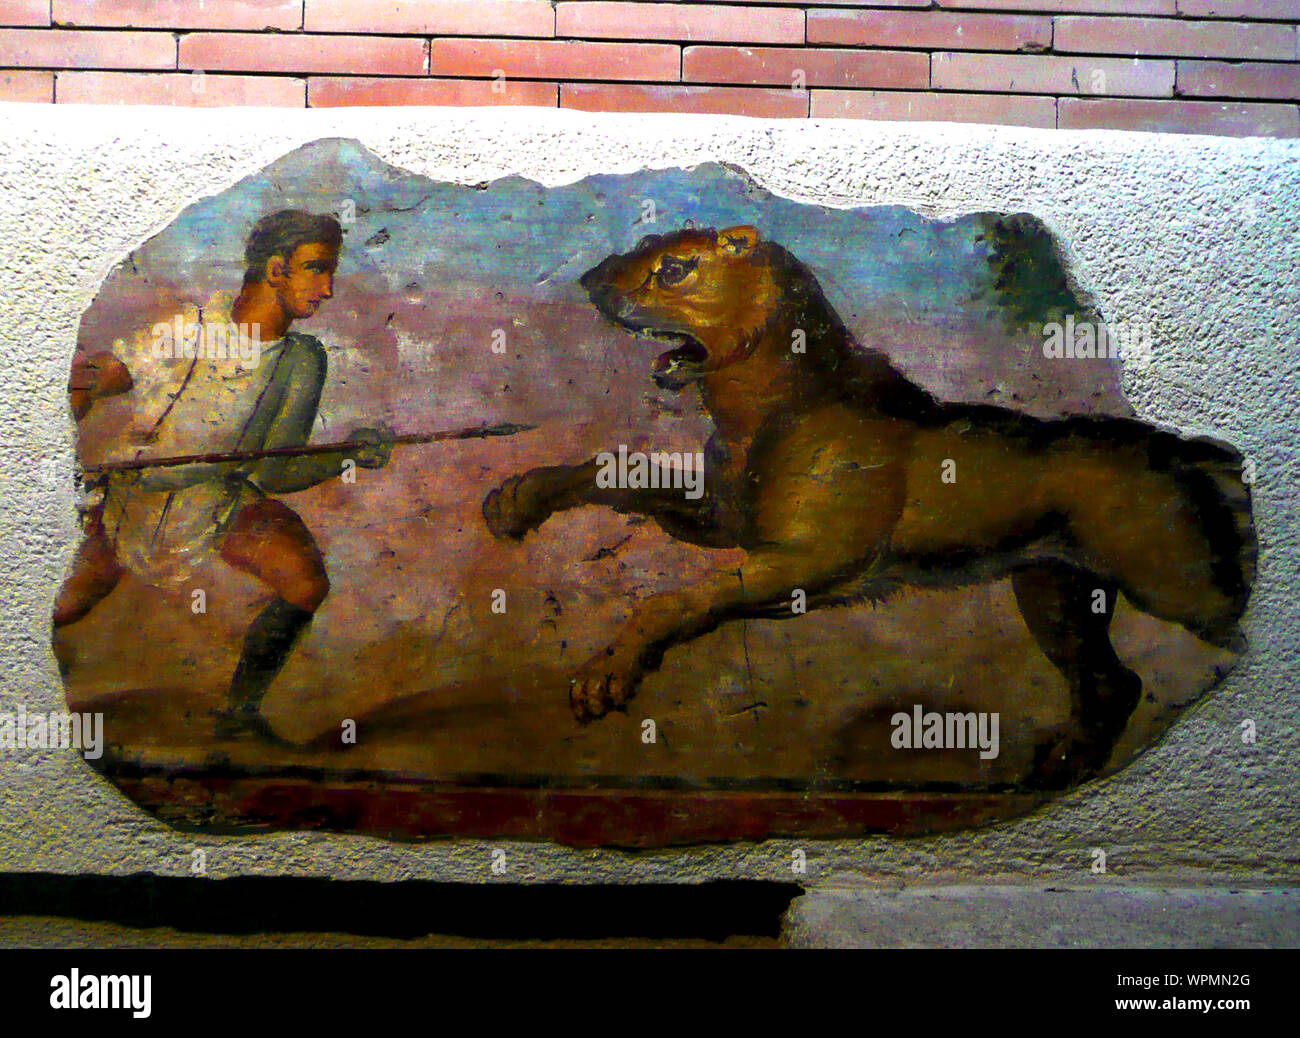 National Museum of Roman Art, Merida, Spain (2009 photograph) a slave (or gladiator) fighting a lion. Stock Photo